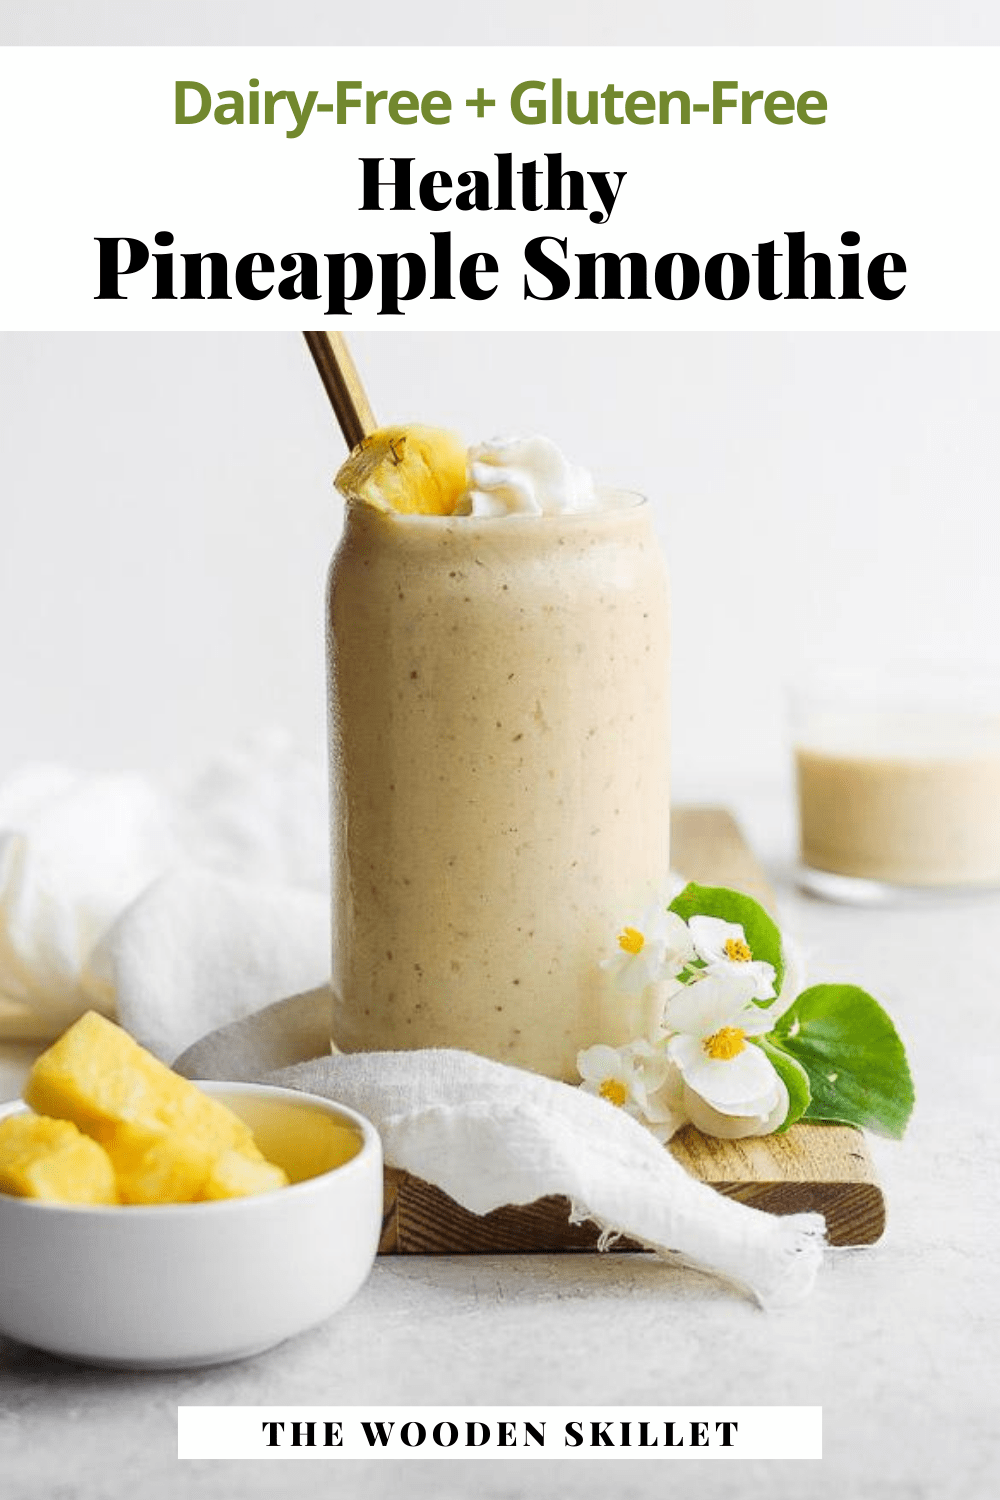 Pinterest image for a healthy pineapple smoothie.